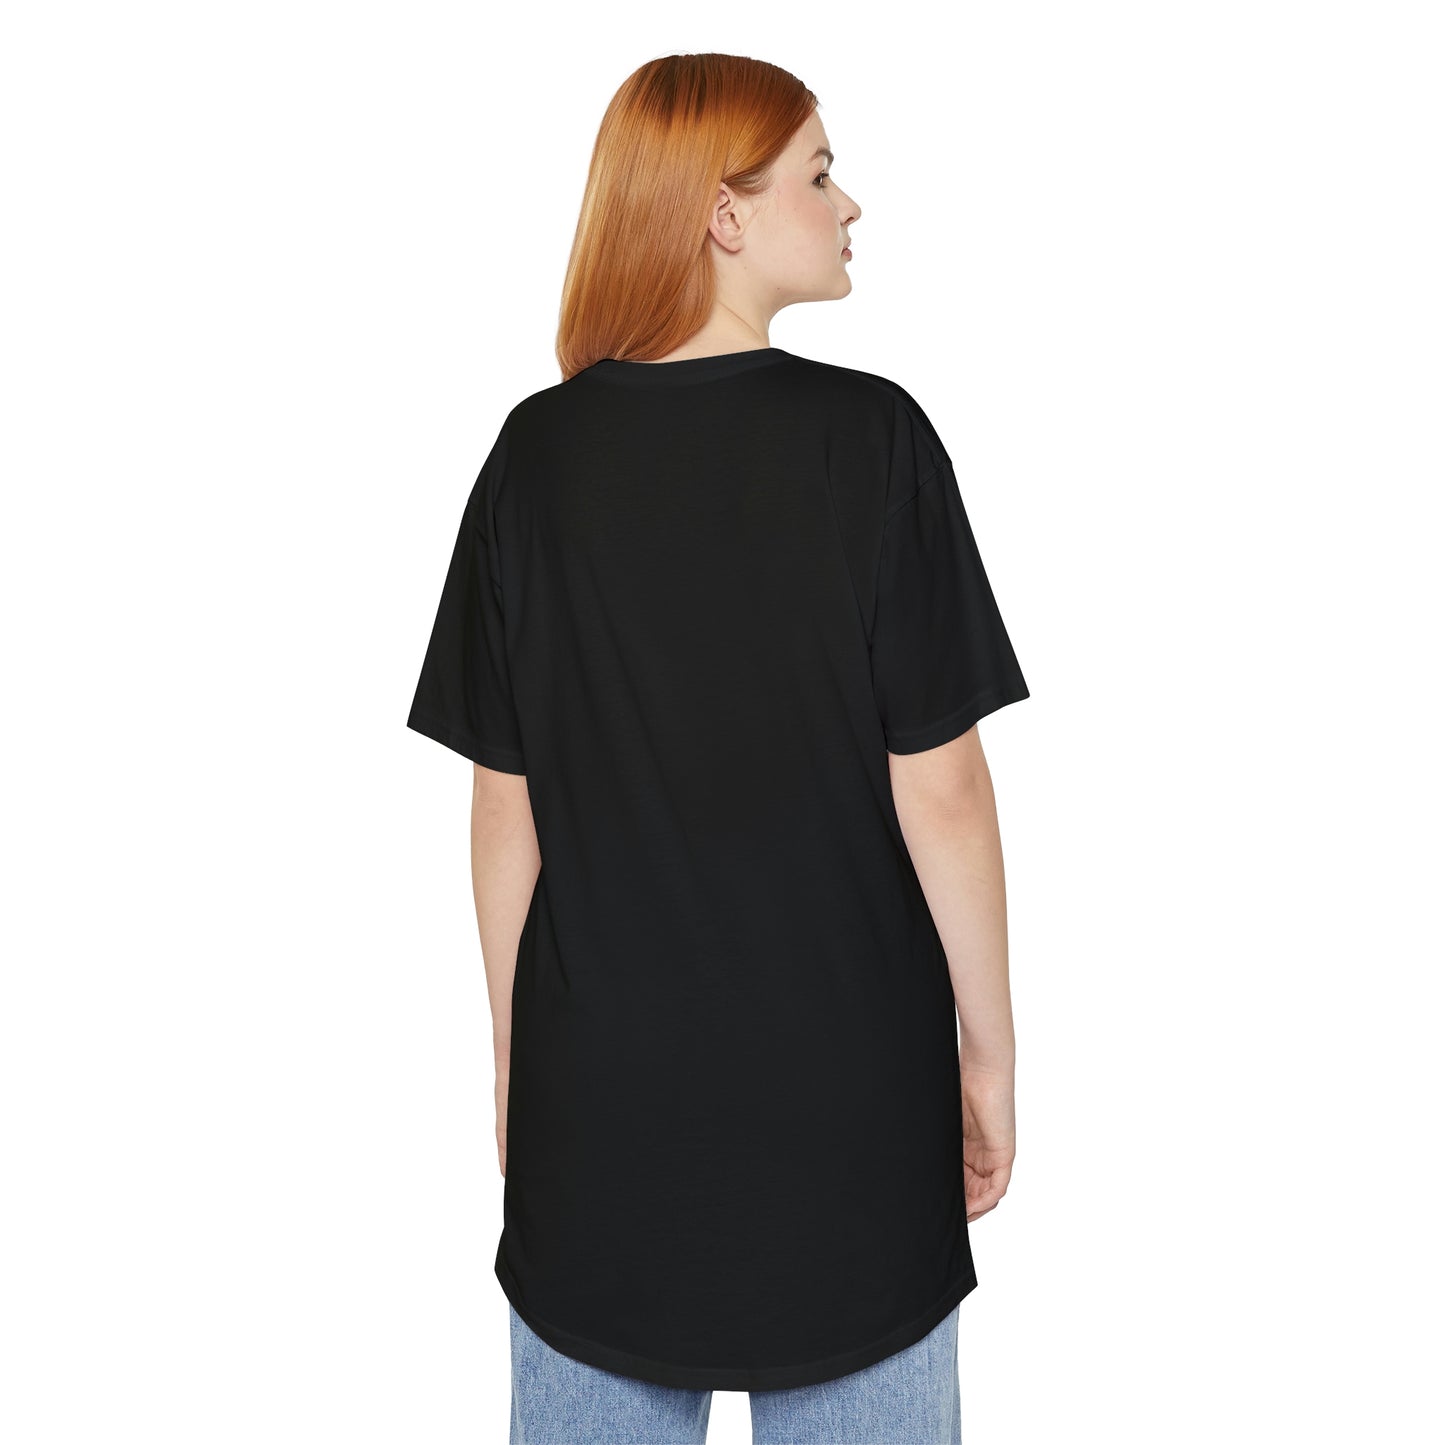 Mock up of the tall woman modeling the back of the Black t-shirt